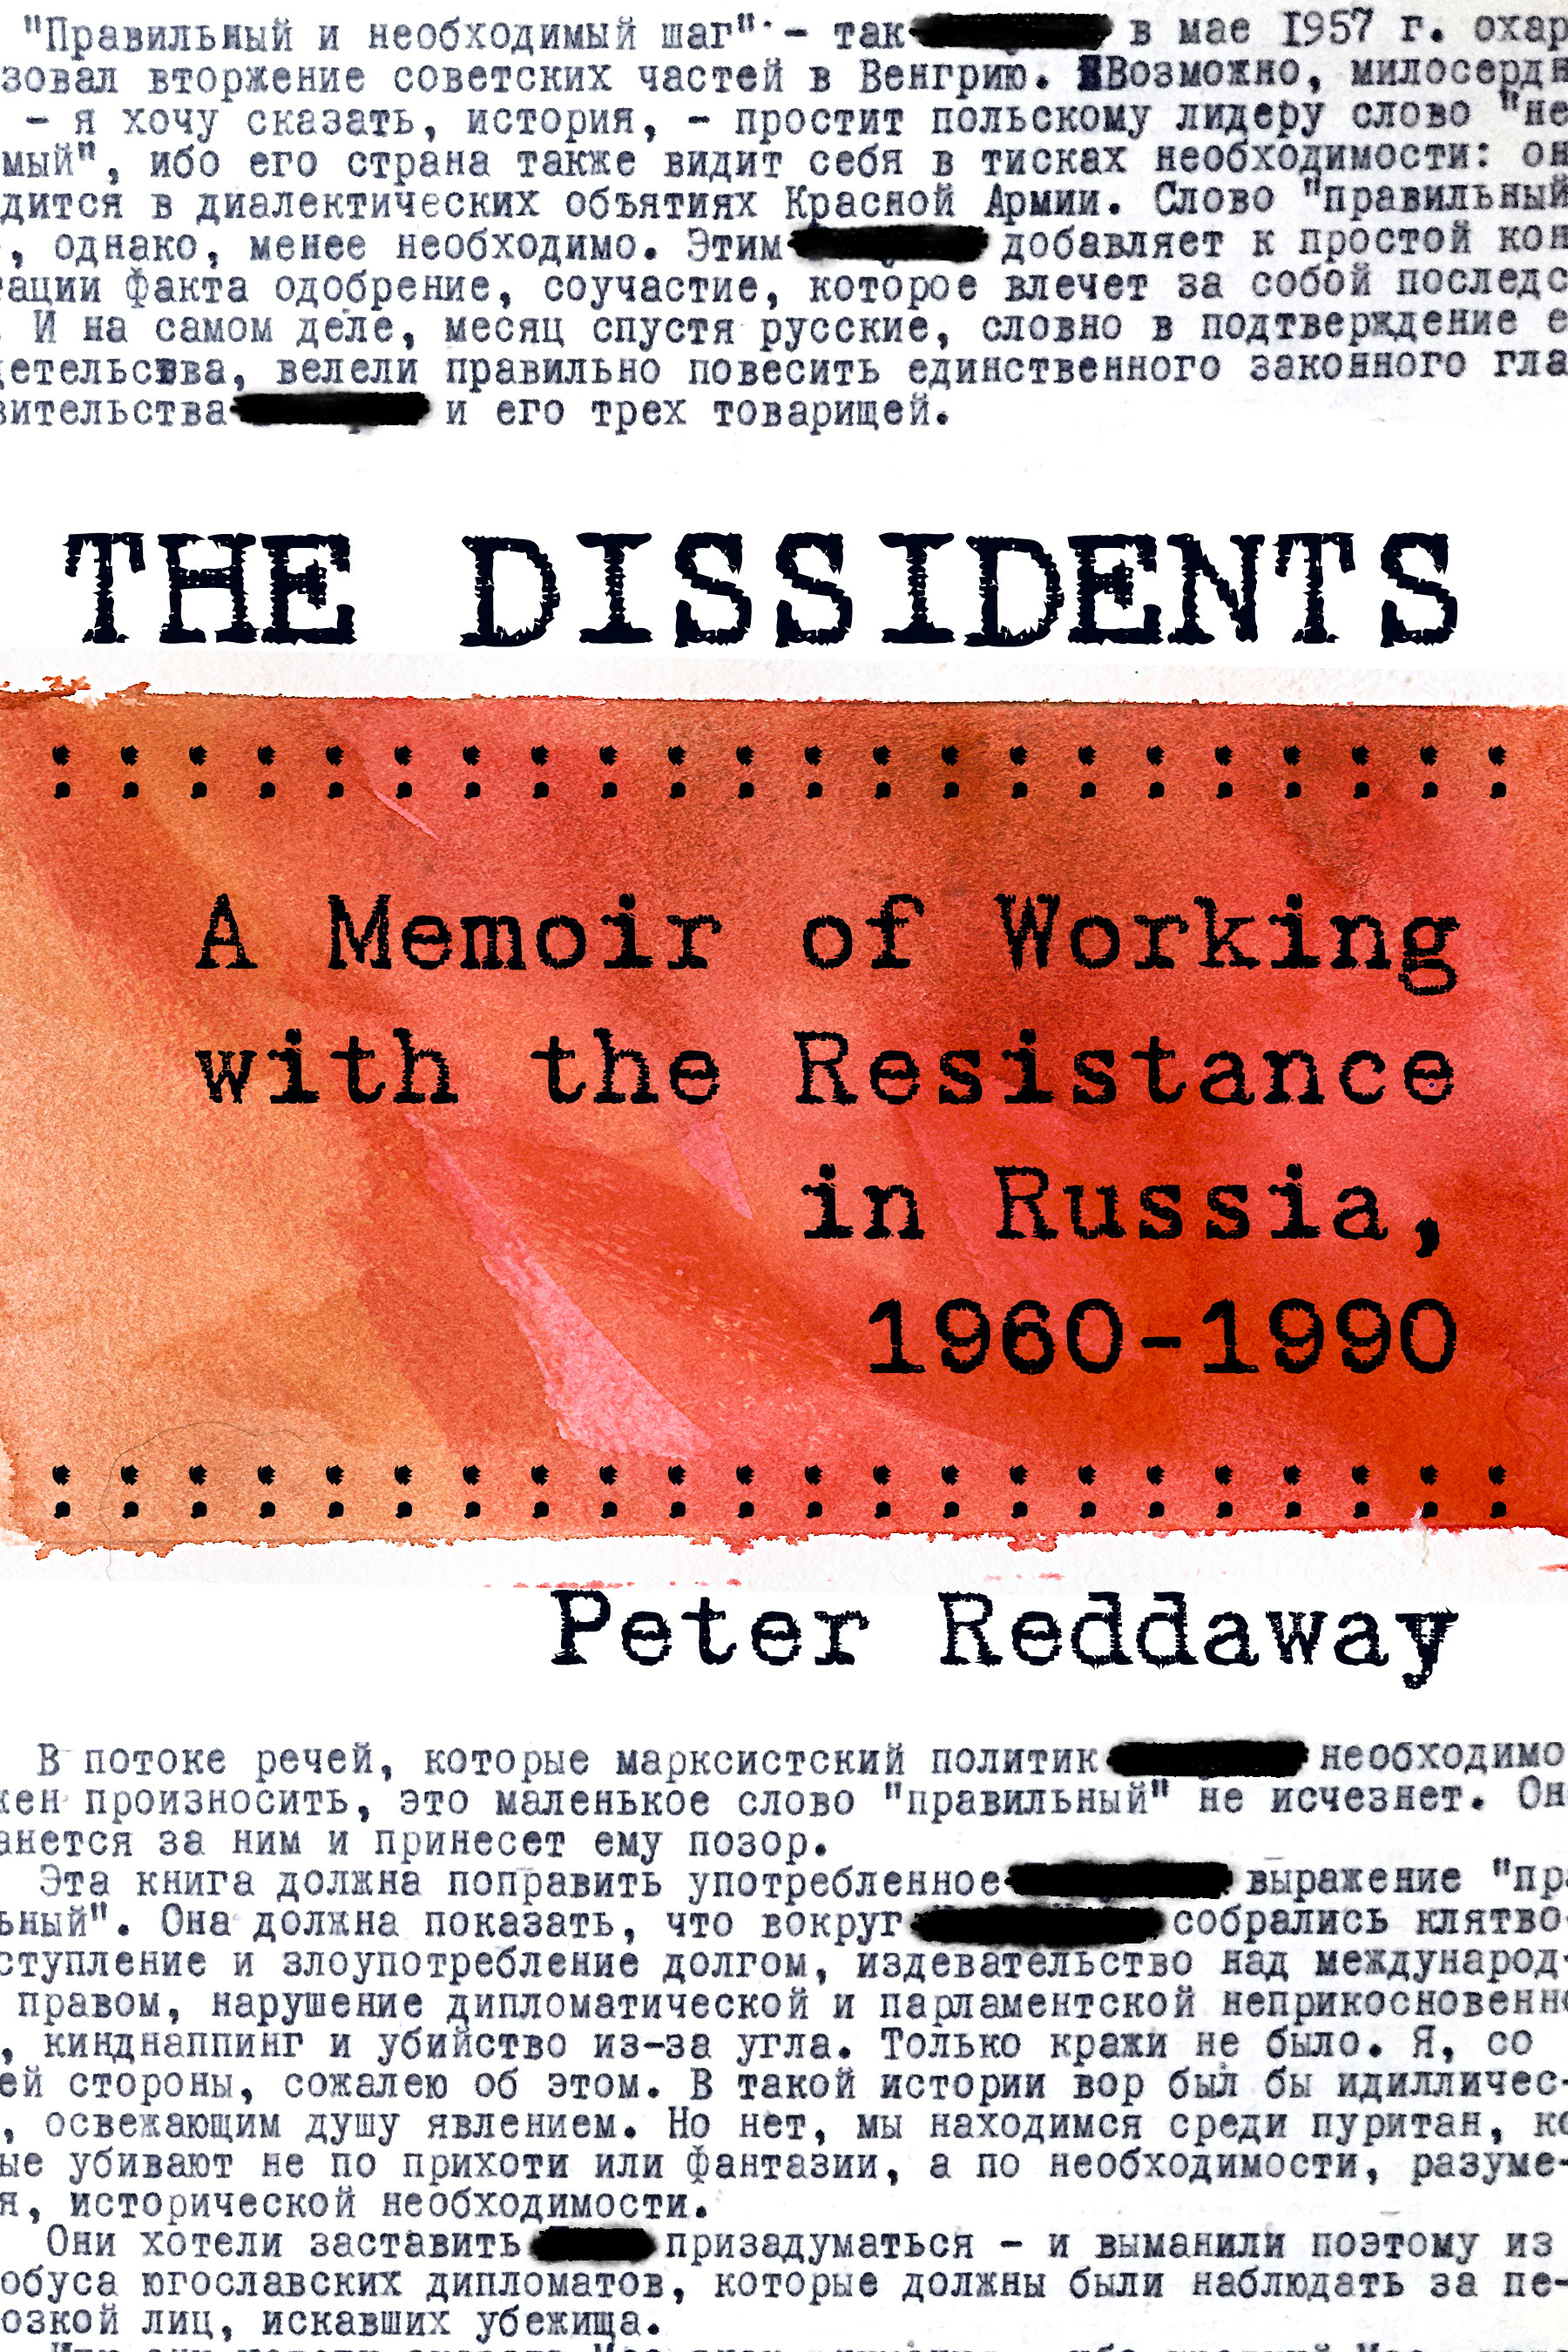 The Dissidents: A Memoir of Working with the Resistance in Russia, 1960-1990